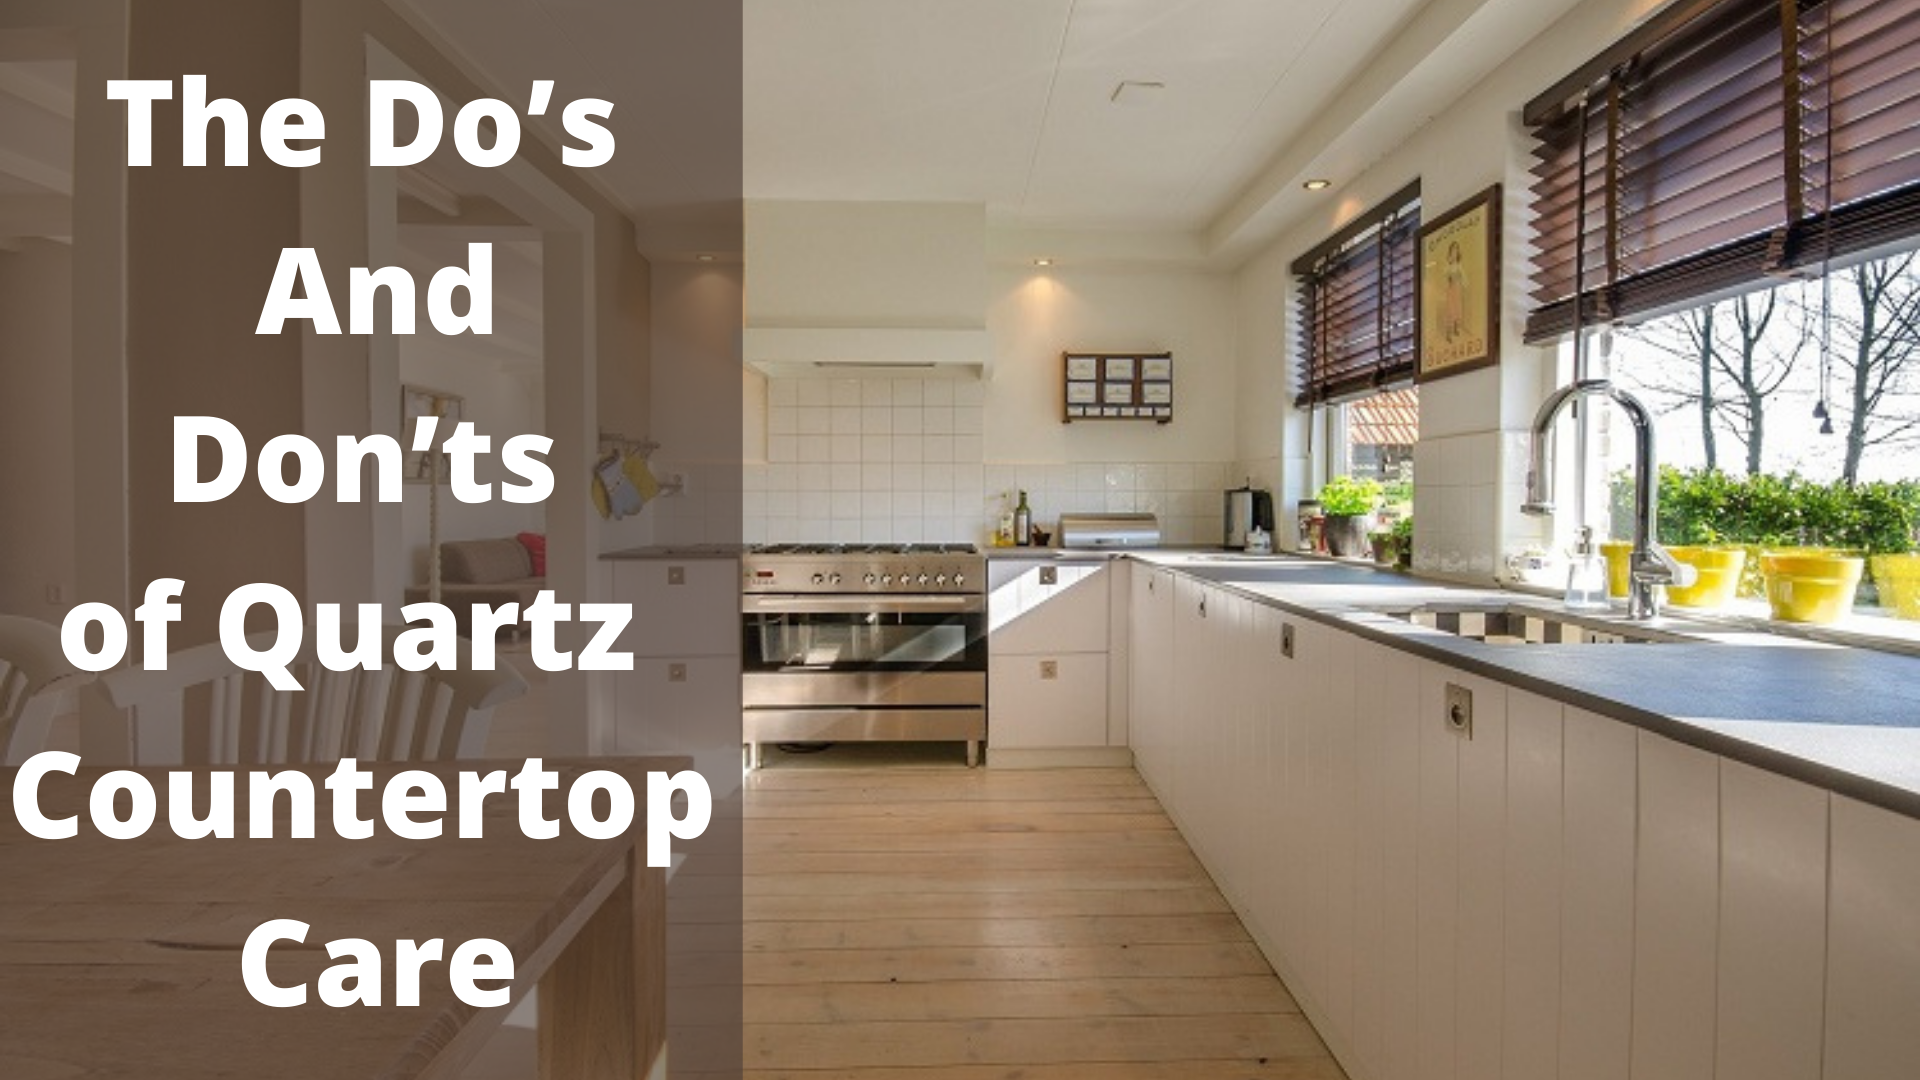 The Do’s And Don’ts of Quartz Countertop Care